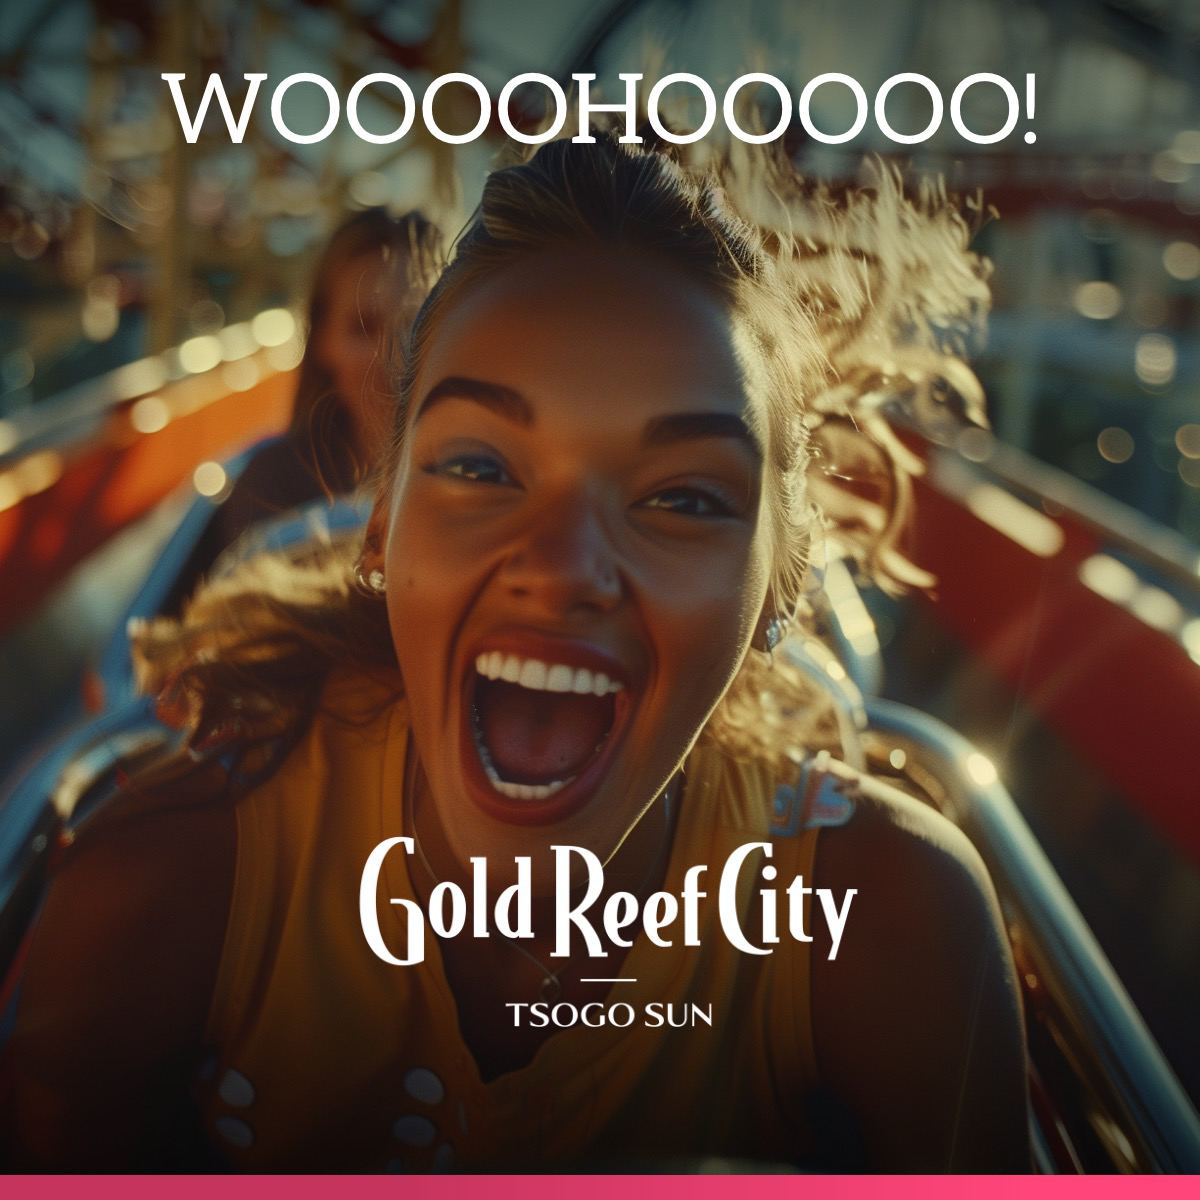 It’s time to go sky-high, round about, up and down, twisting out of control at Mzansi’s favourite theme park. Just for R265pp you get all day all rides access to the biggest thrills in the country. Get your ticket online only at goldreefcity.co.za